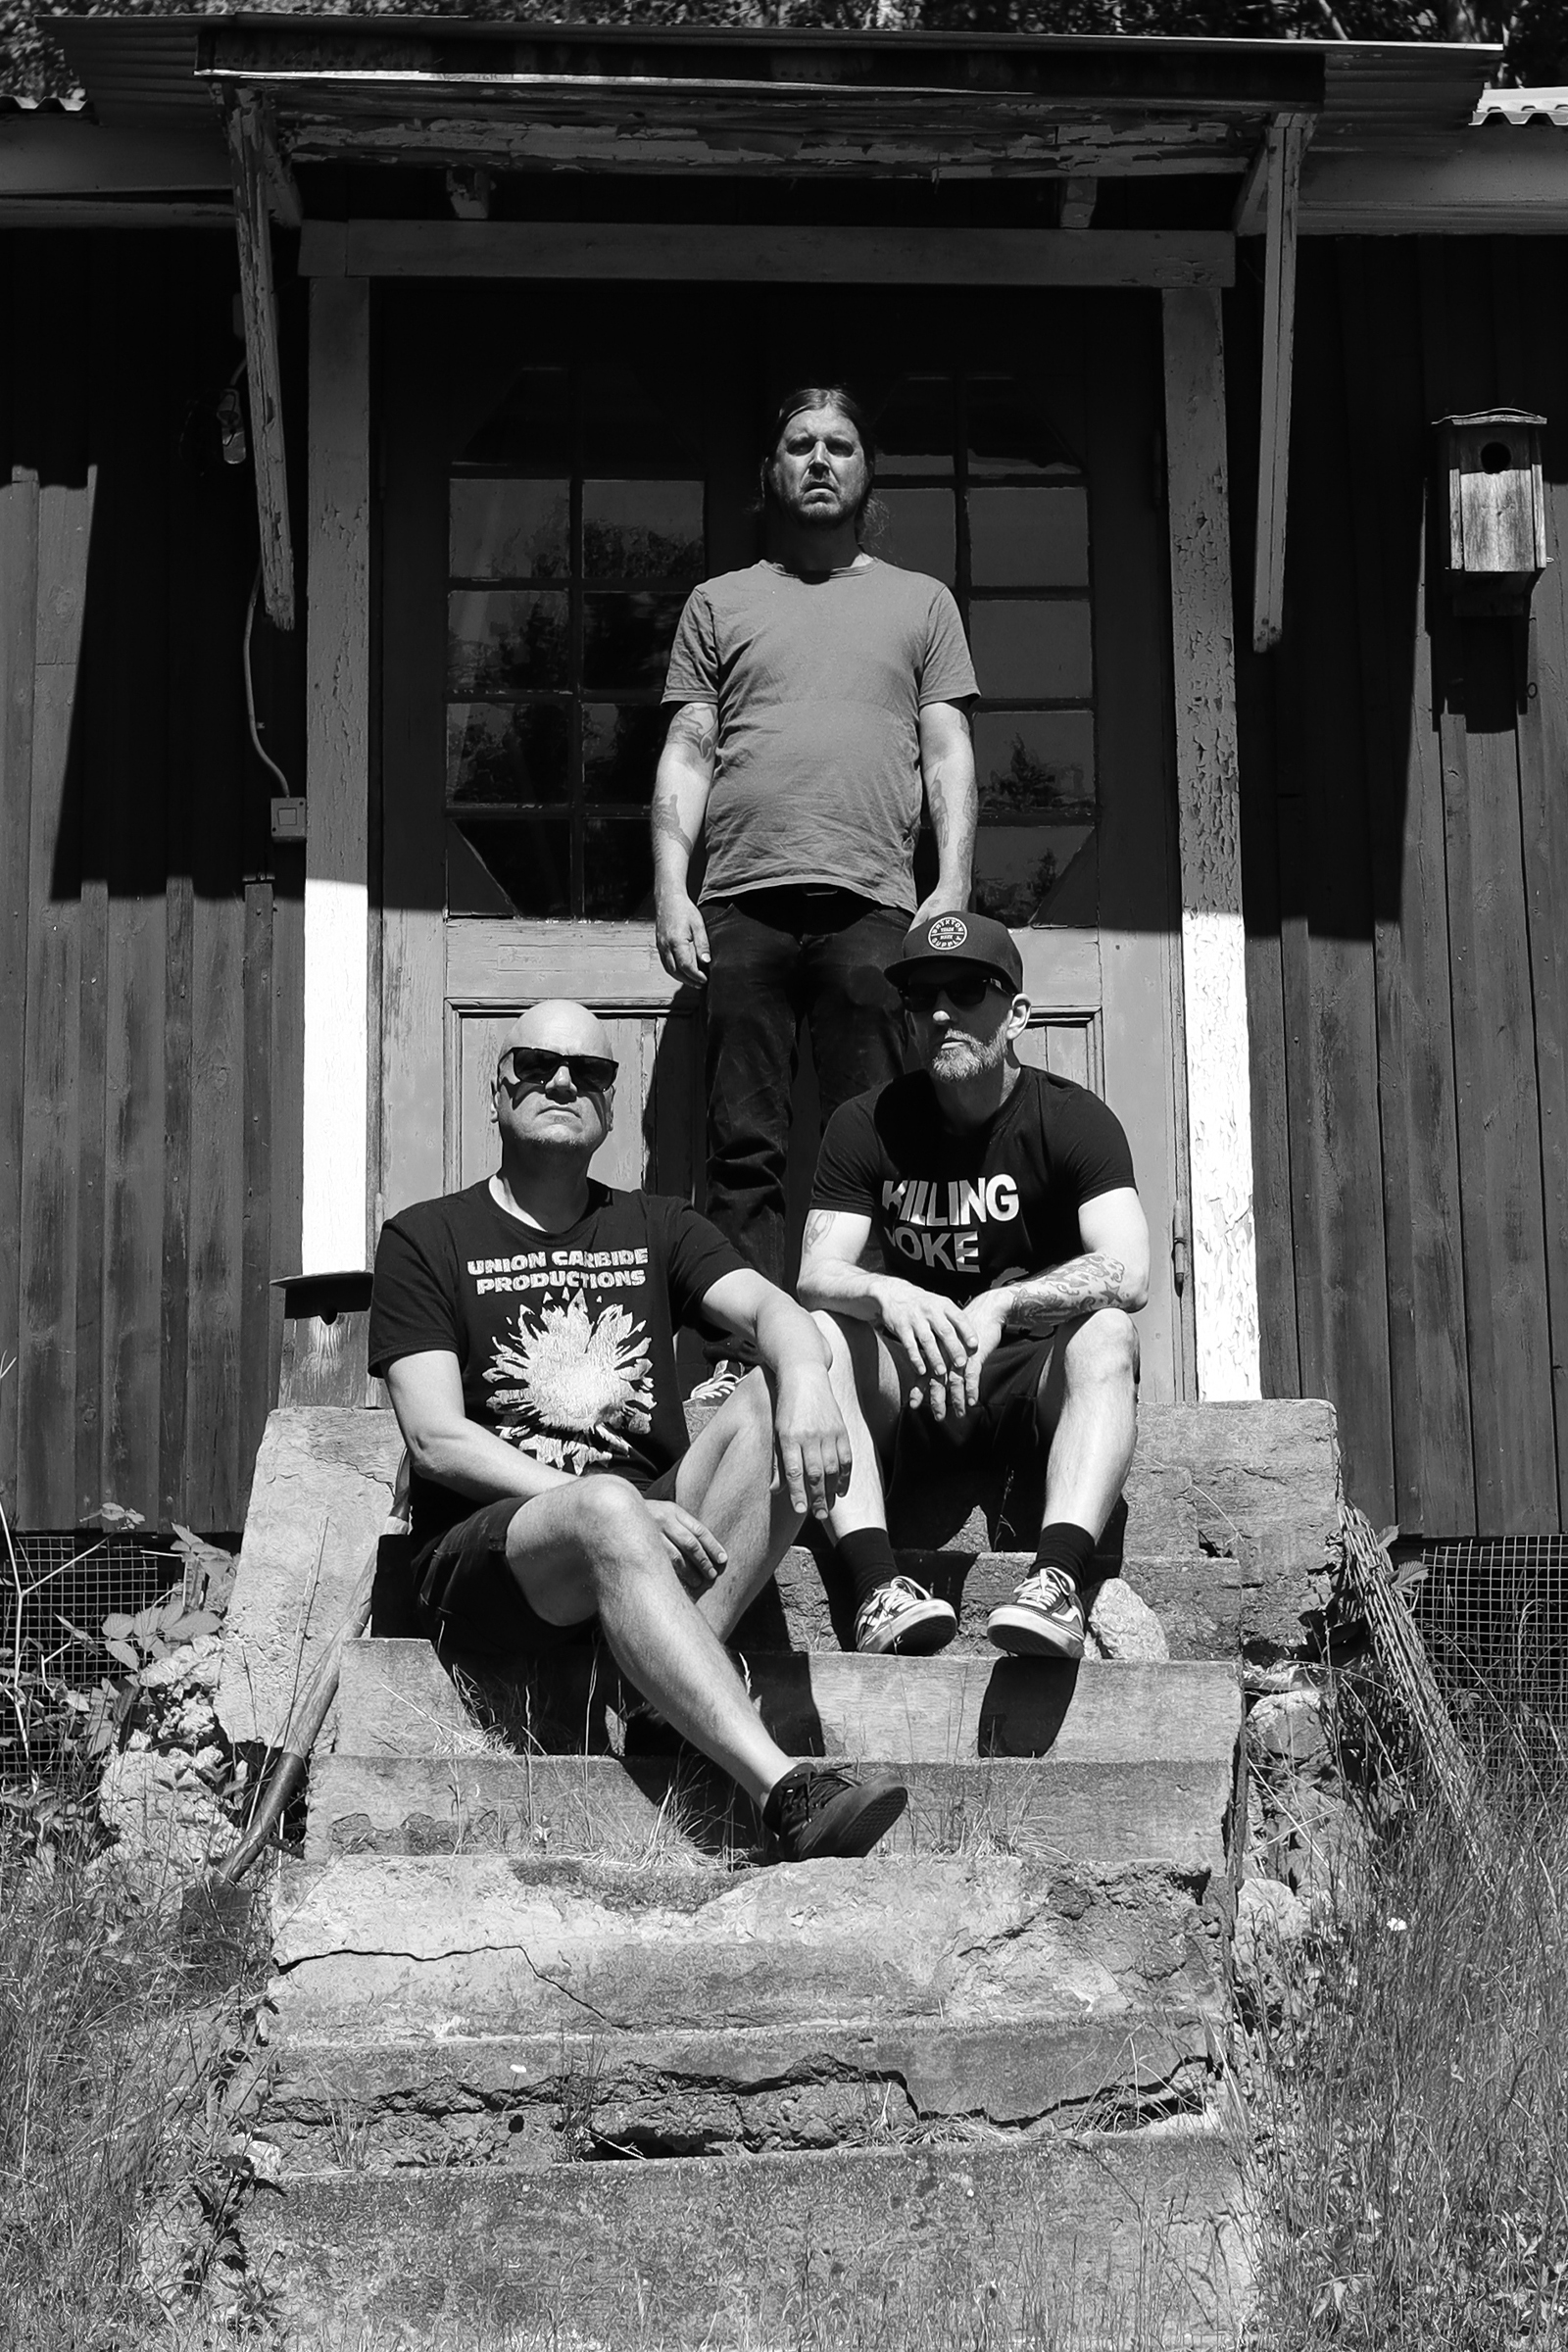 Vertical close-up photo of Haystack at Studio Underjord in Finspång, Sweden: Ulf, Jonas, and Patrik, with a distinct shadow on the wall behind them, captured by Joona Hassinen.